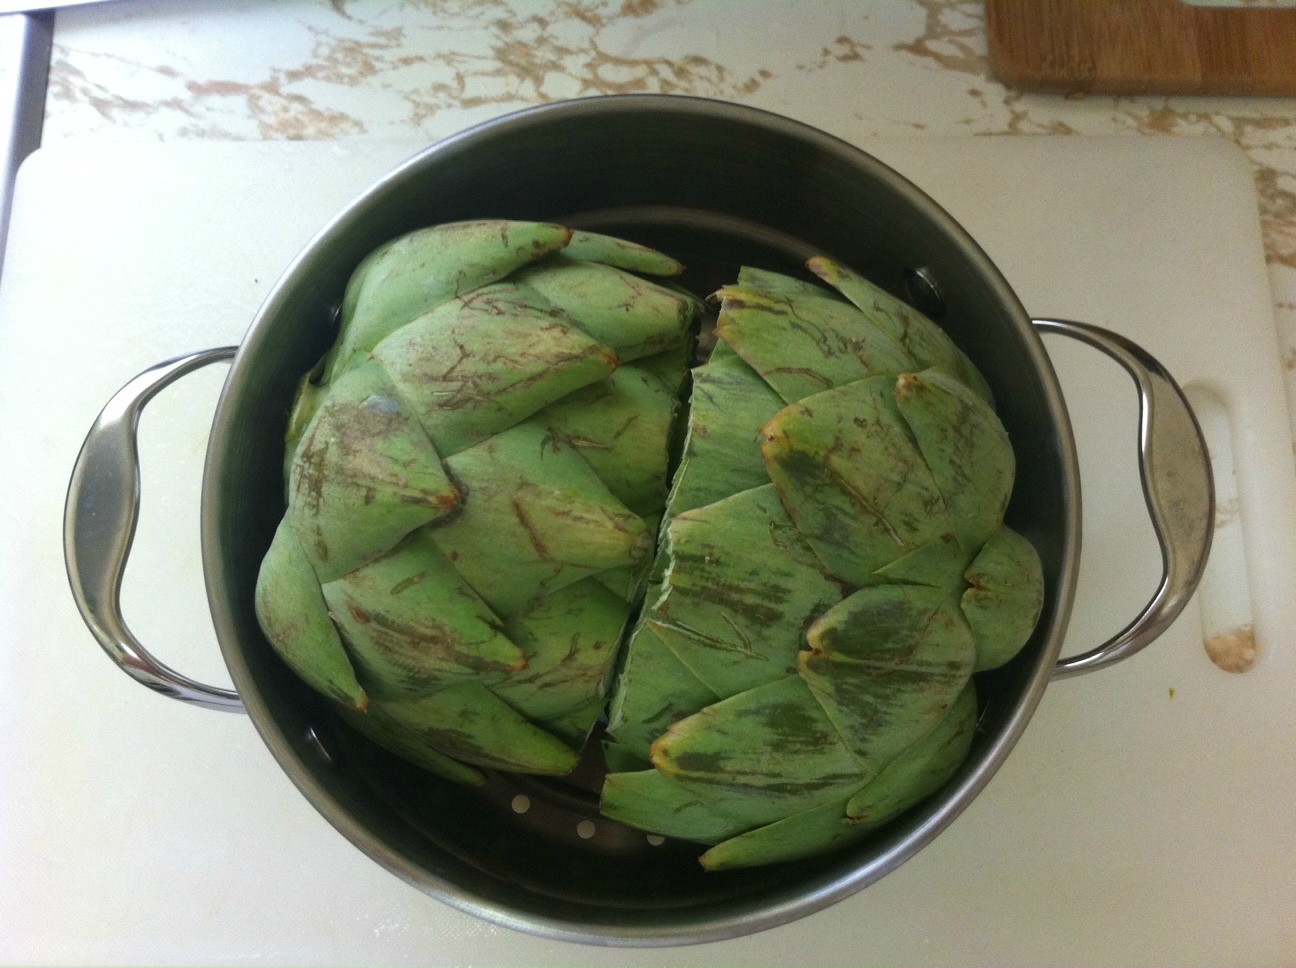 Artichokes in the steamer on their side. This also works facing upward if they fit.